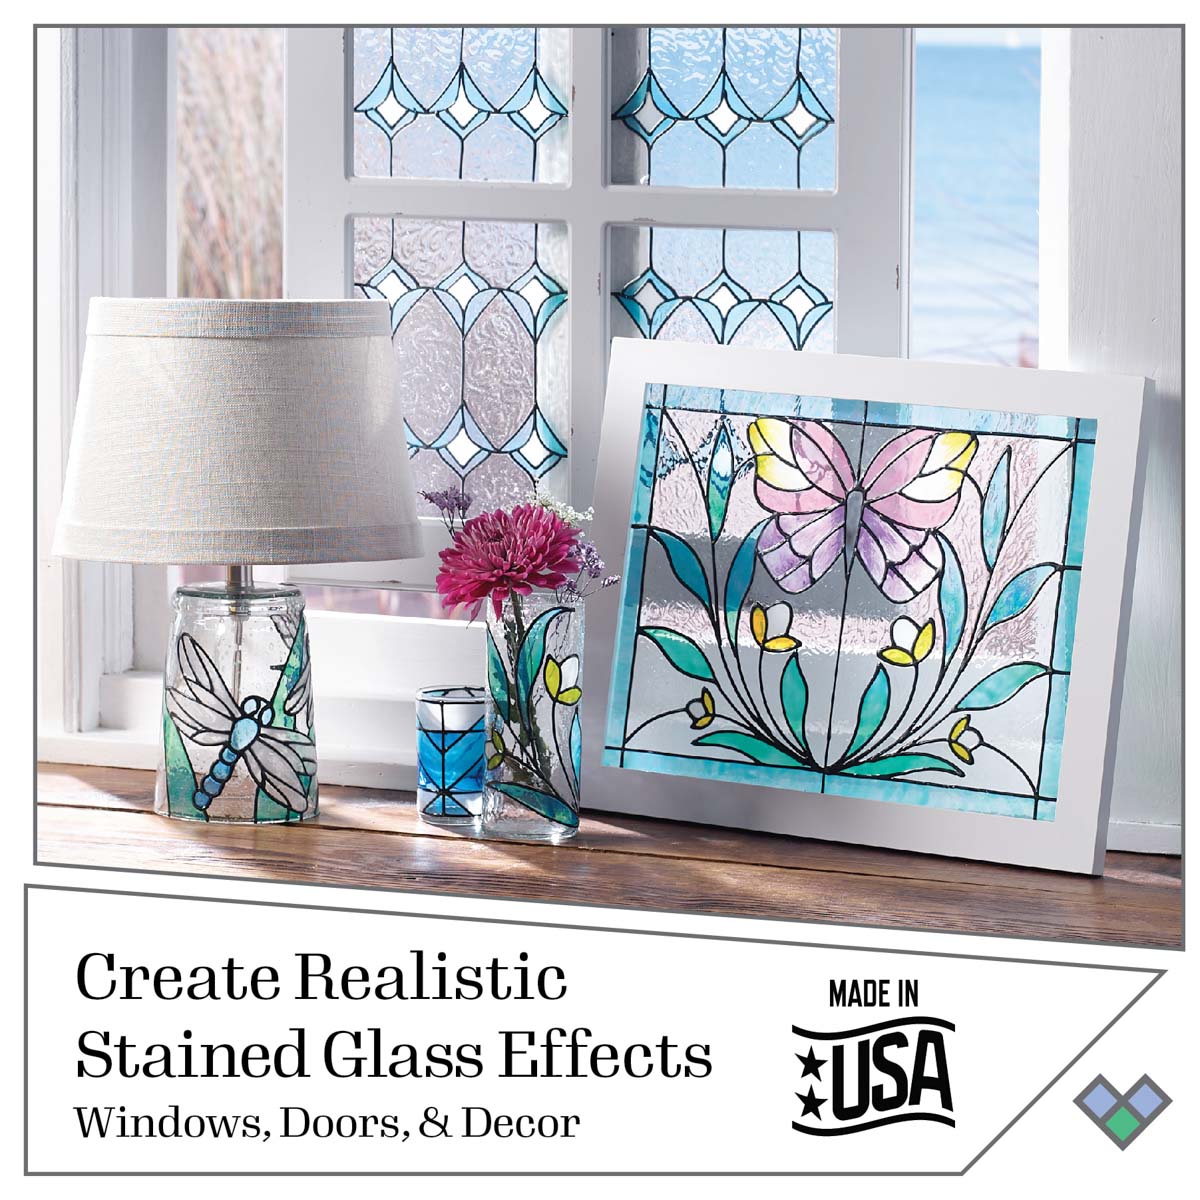 Gallery Glass ® Stained Glass Effect Paint - Aqua, 2 oz. - 19781